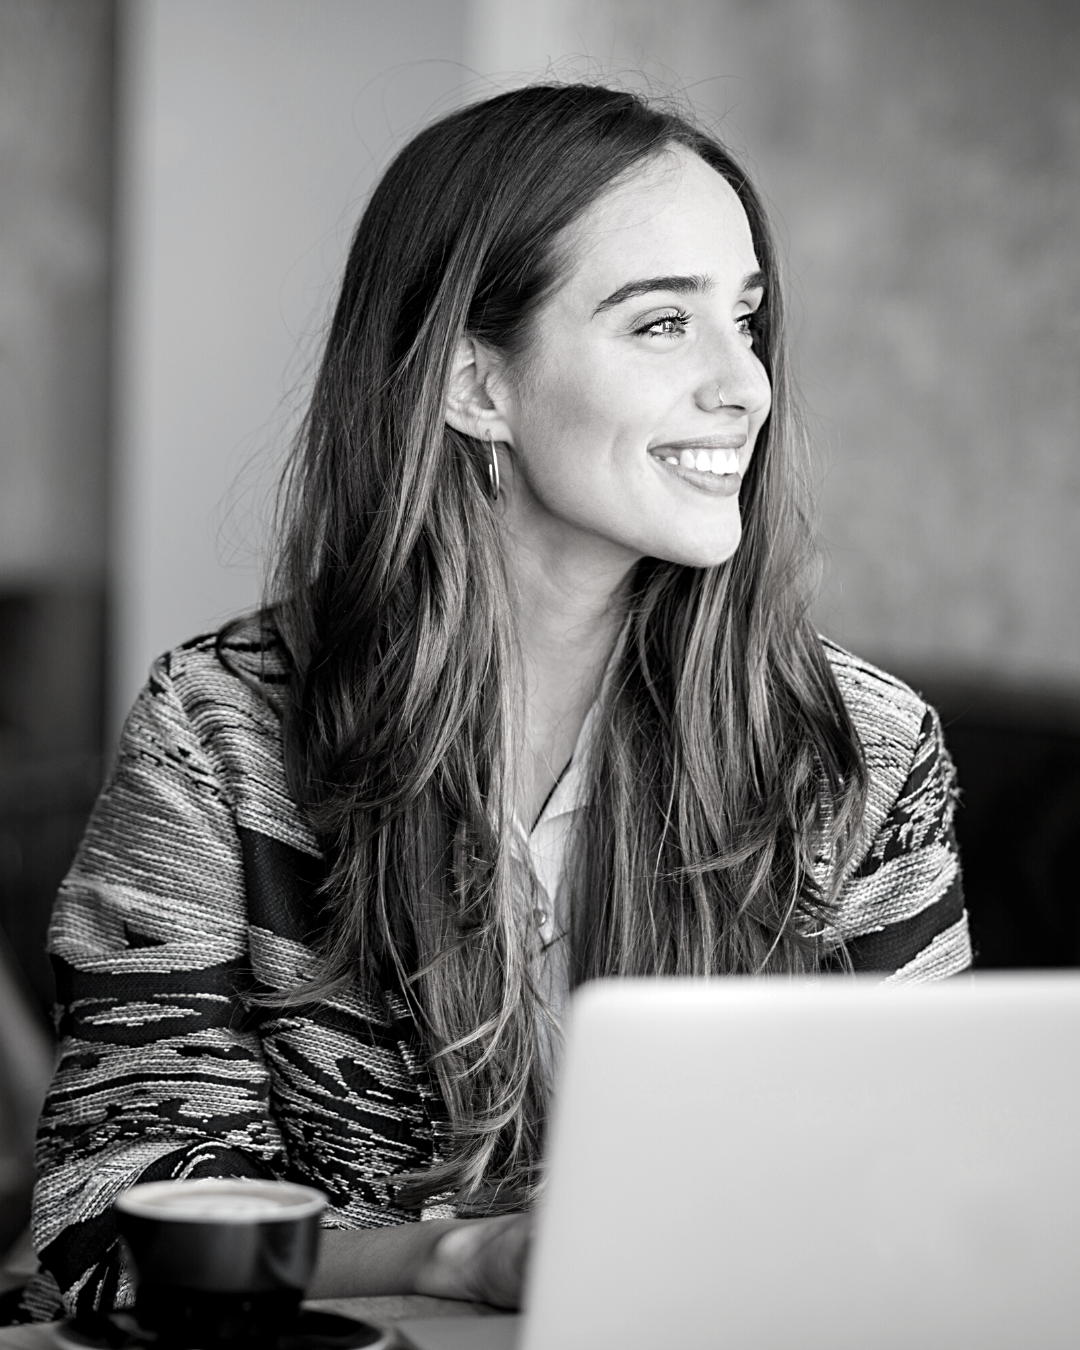 Black and white image of a young woman with long brown hair. She is smiling as she works from her laptop.